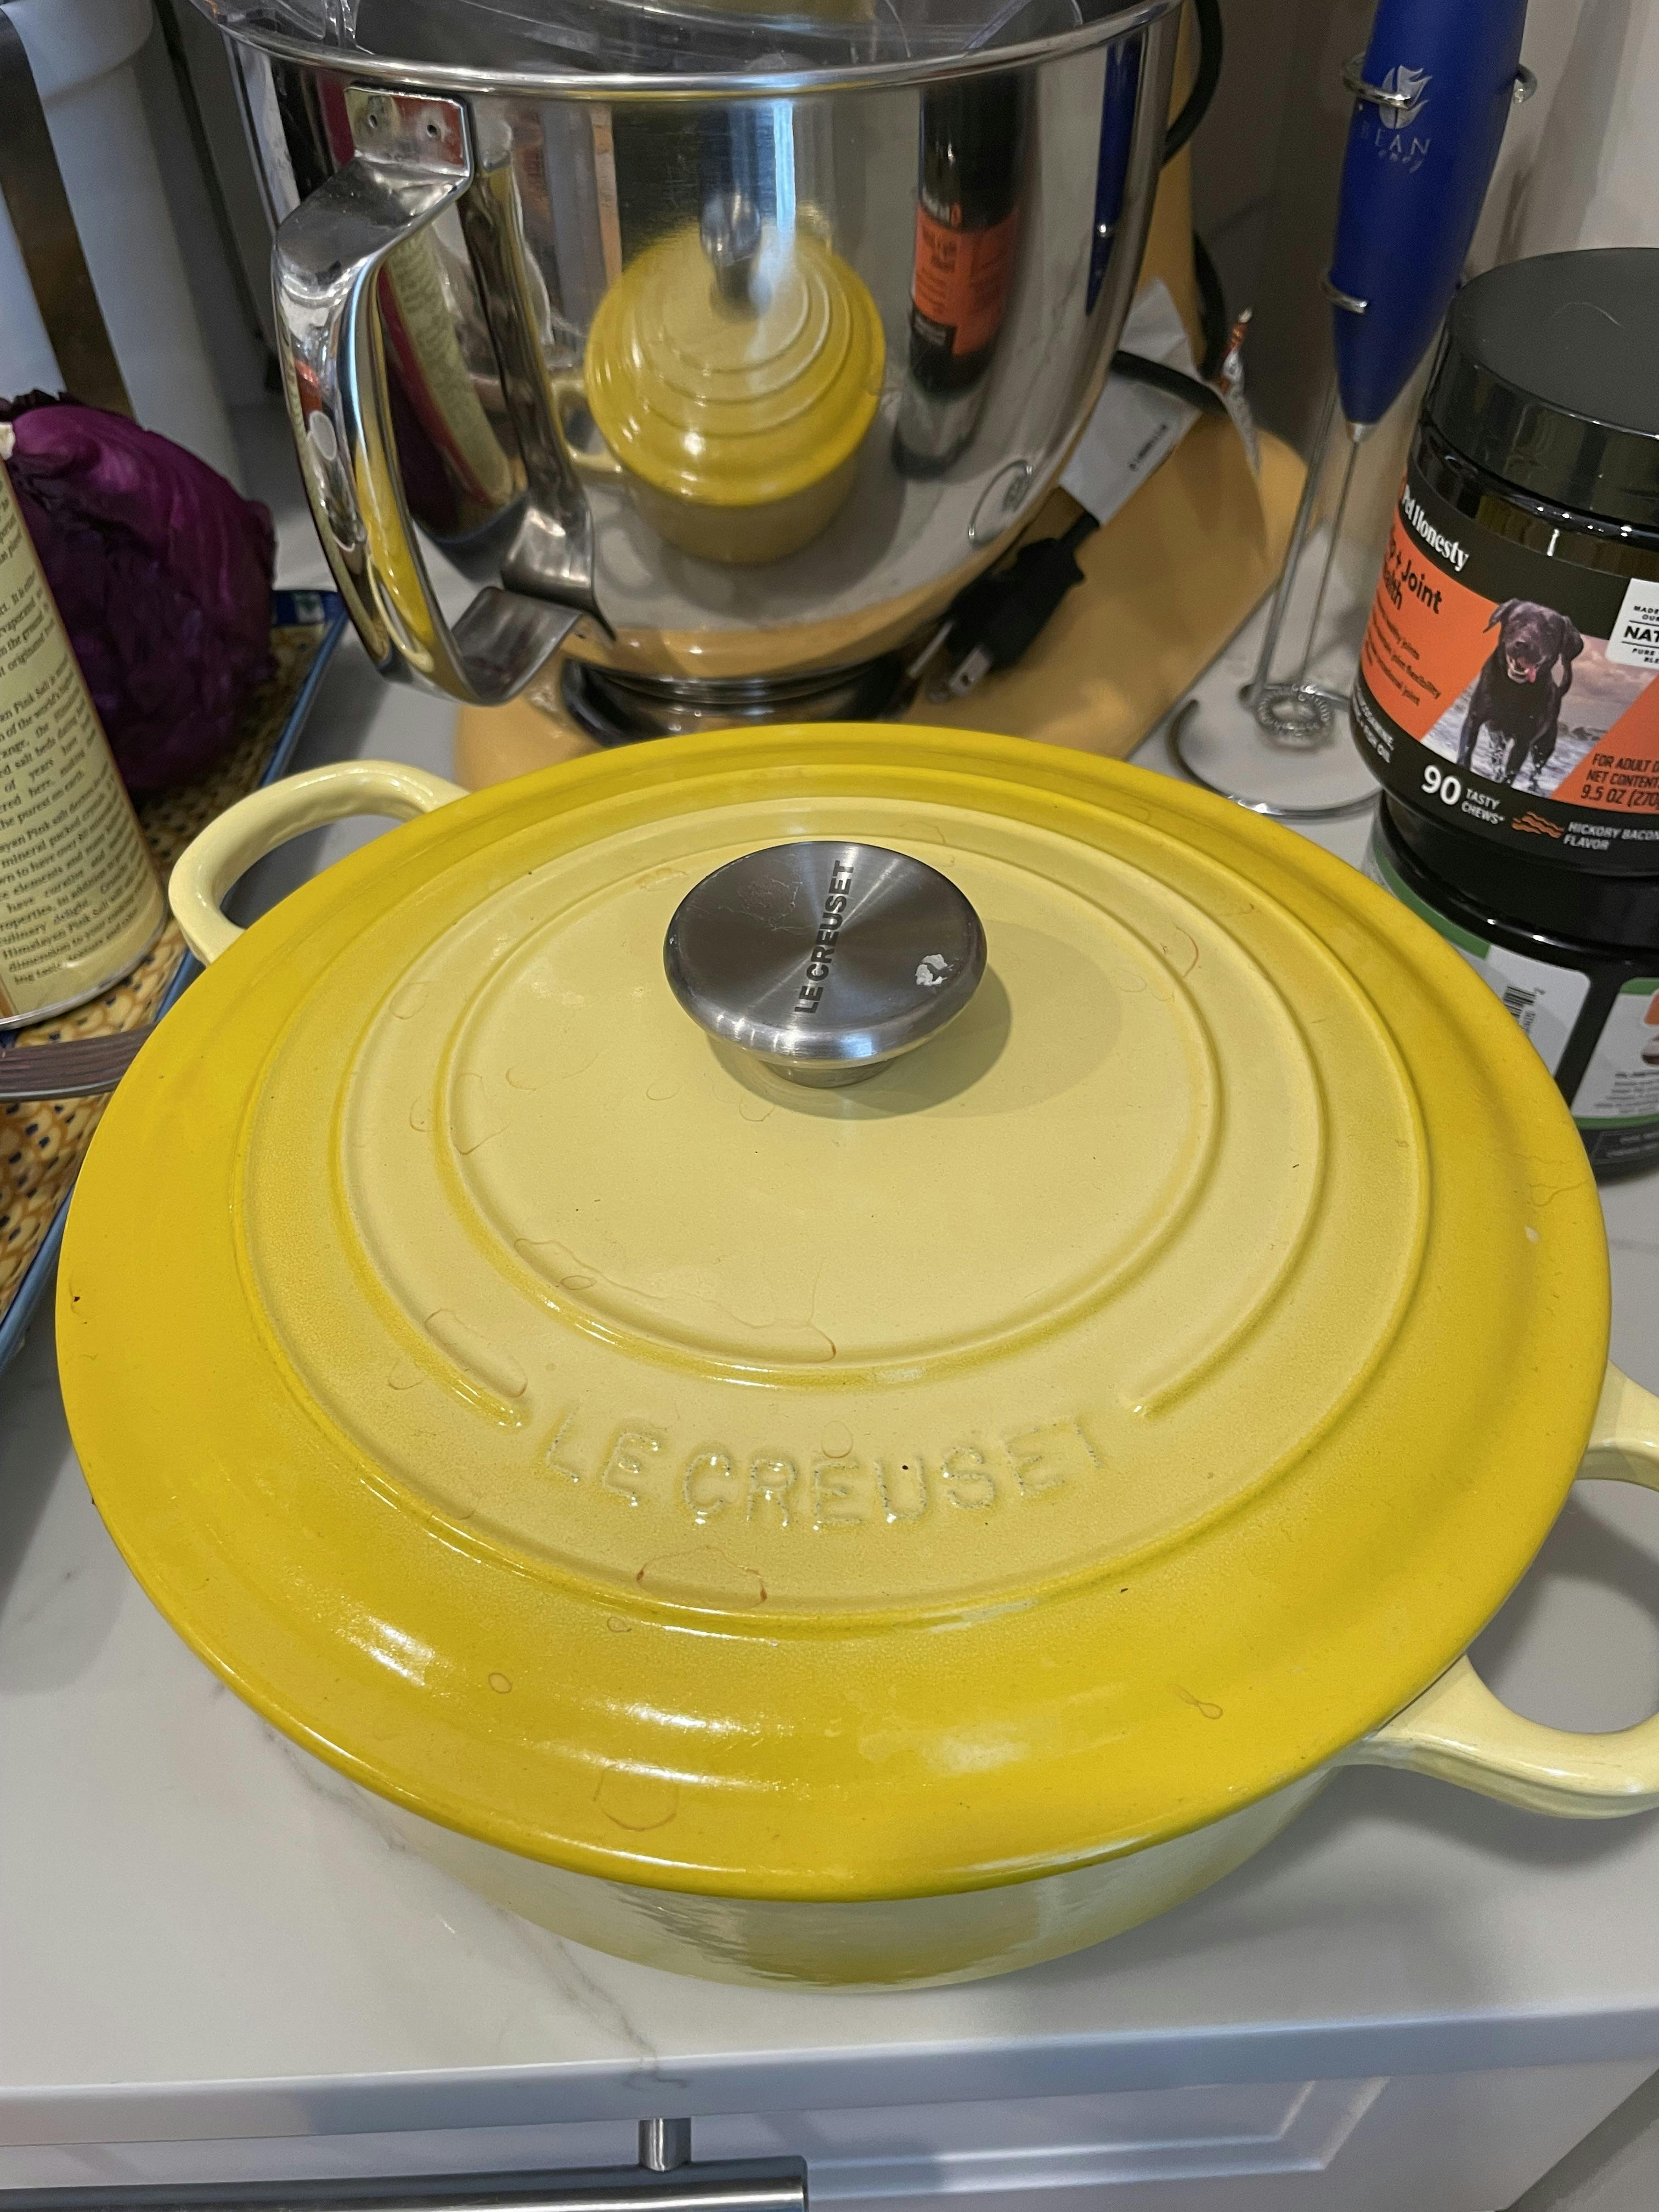 Le Creuset cookware sale: Save up to 31% on cookware sets, Dutch ovens, and  more - Reviewed